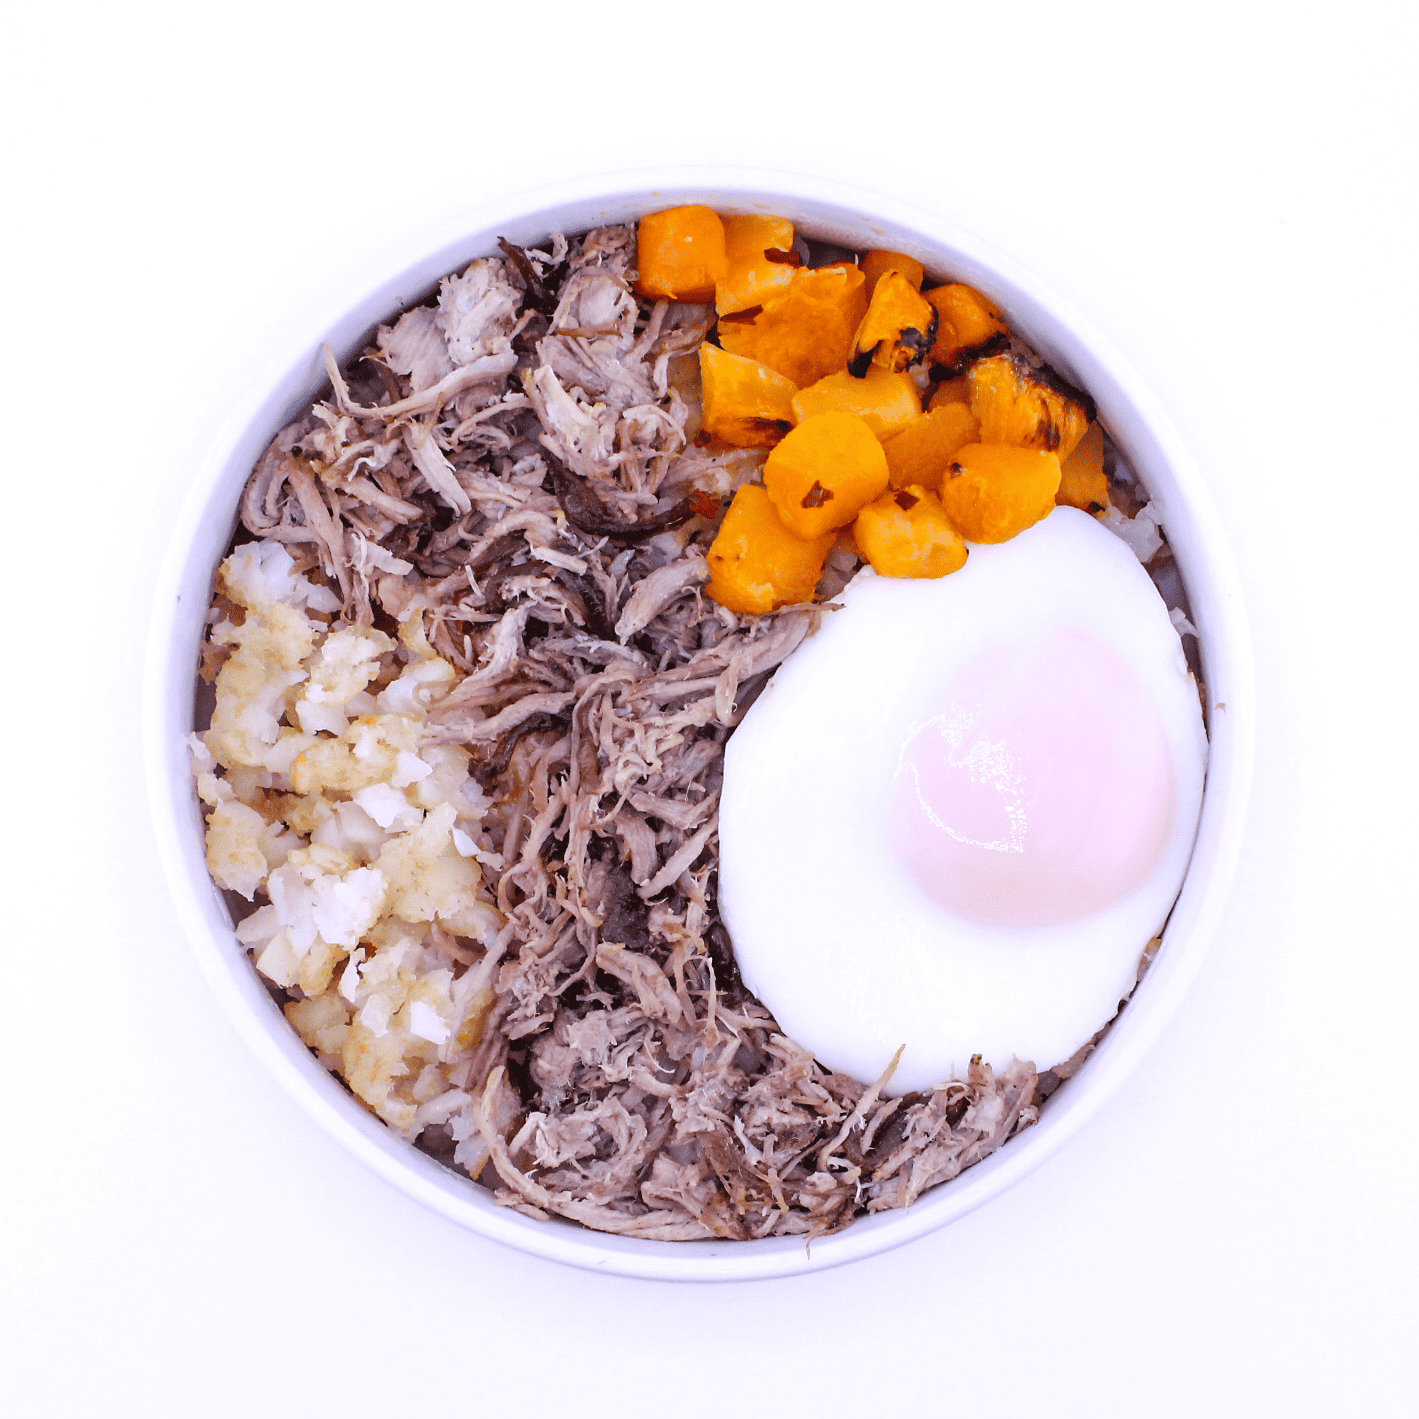 Sunny Sow - Slow roasted pork and onions, roasted butternut squash, crispy potato hash, cage-free egg over easy